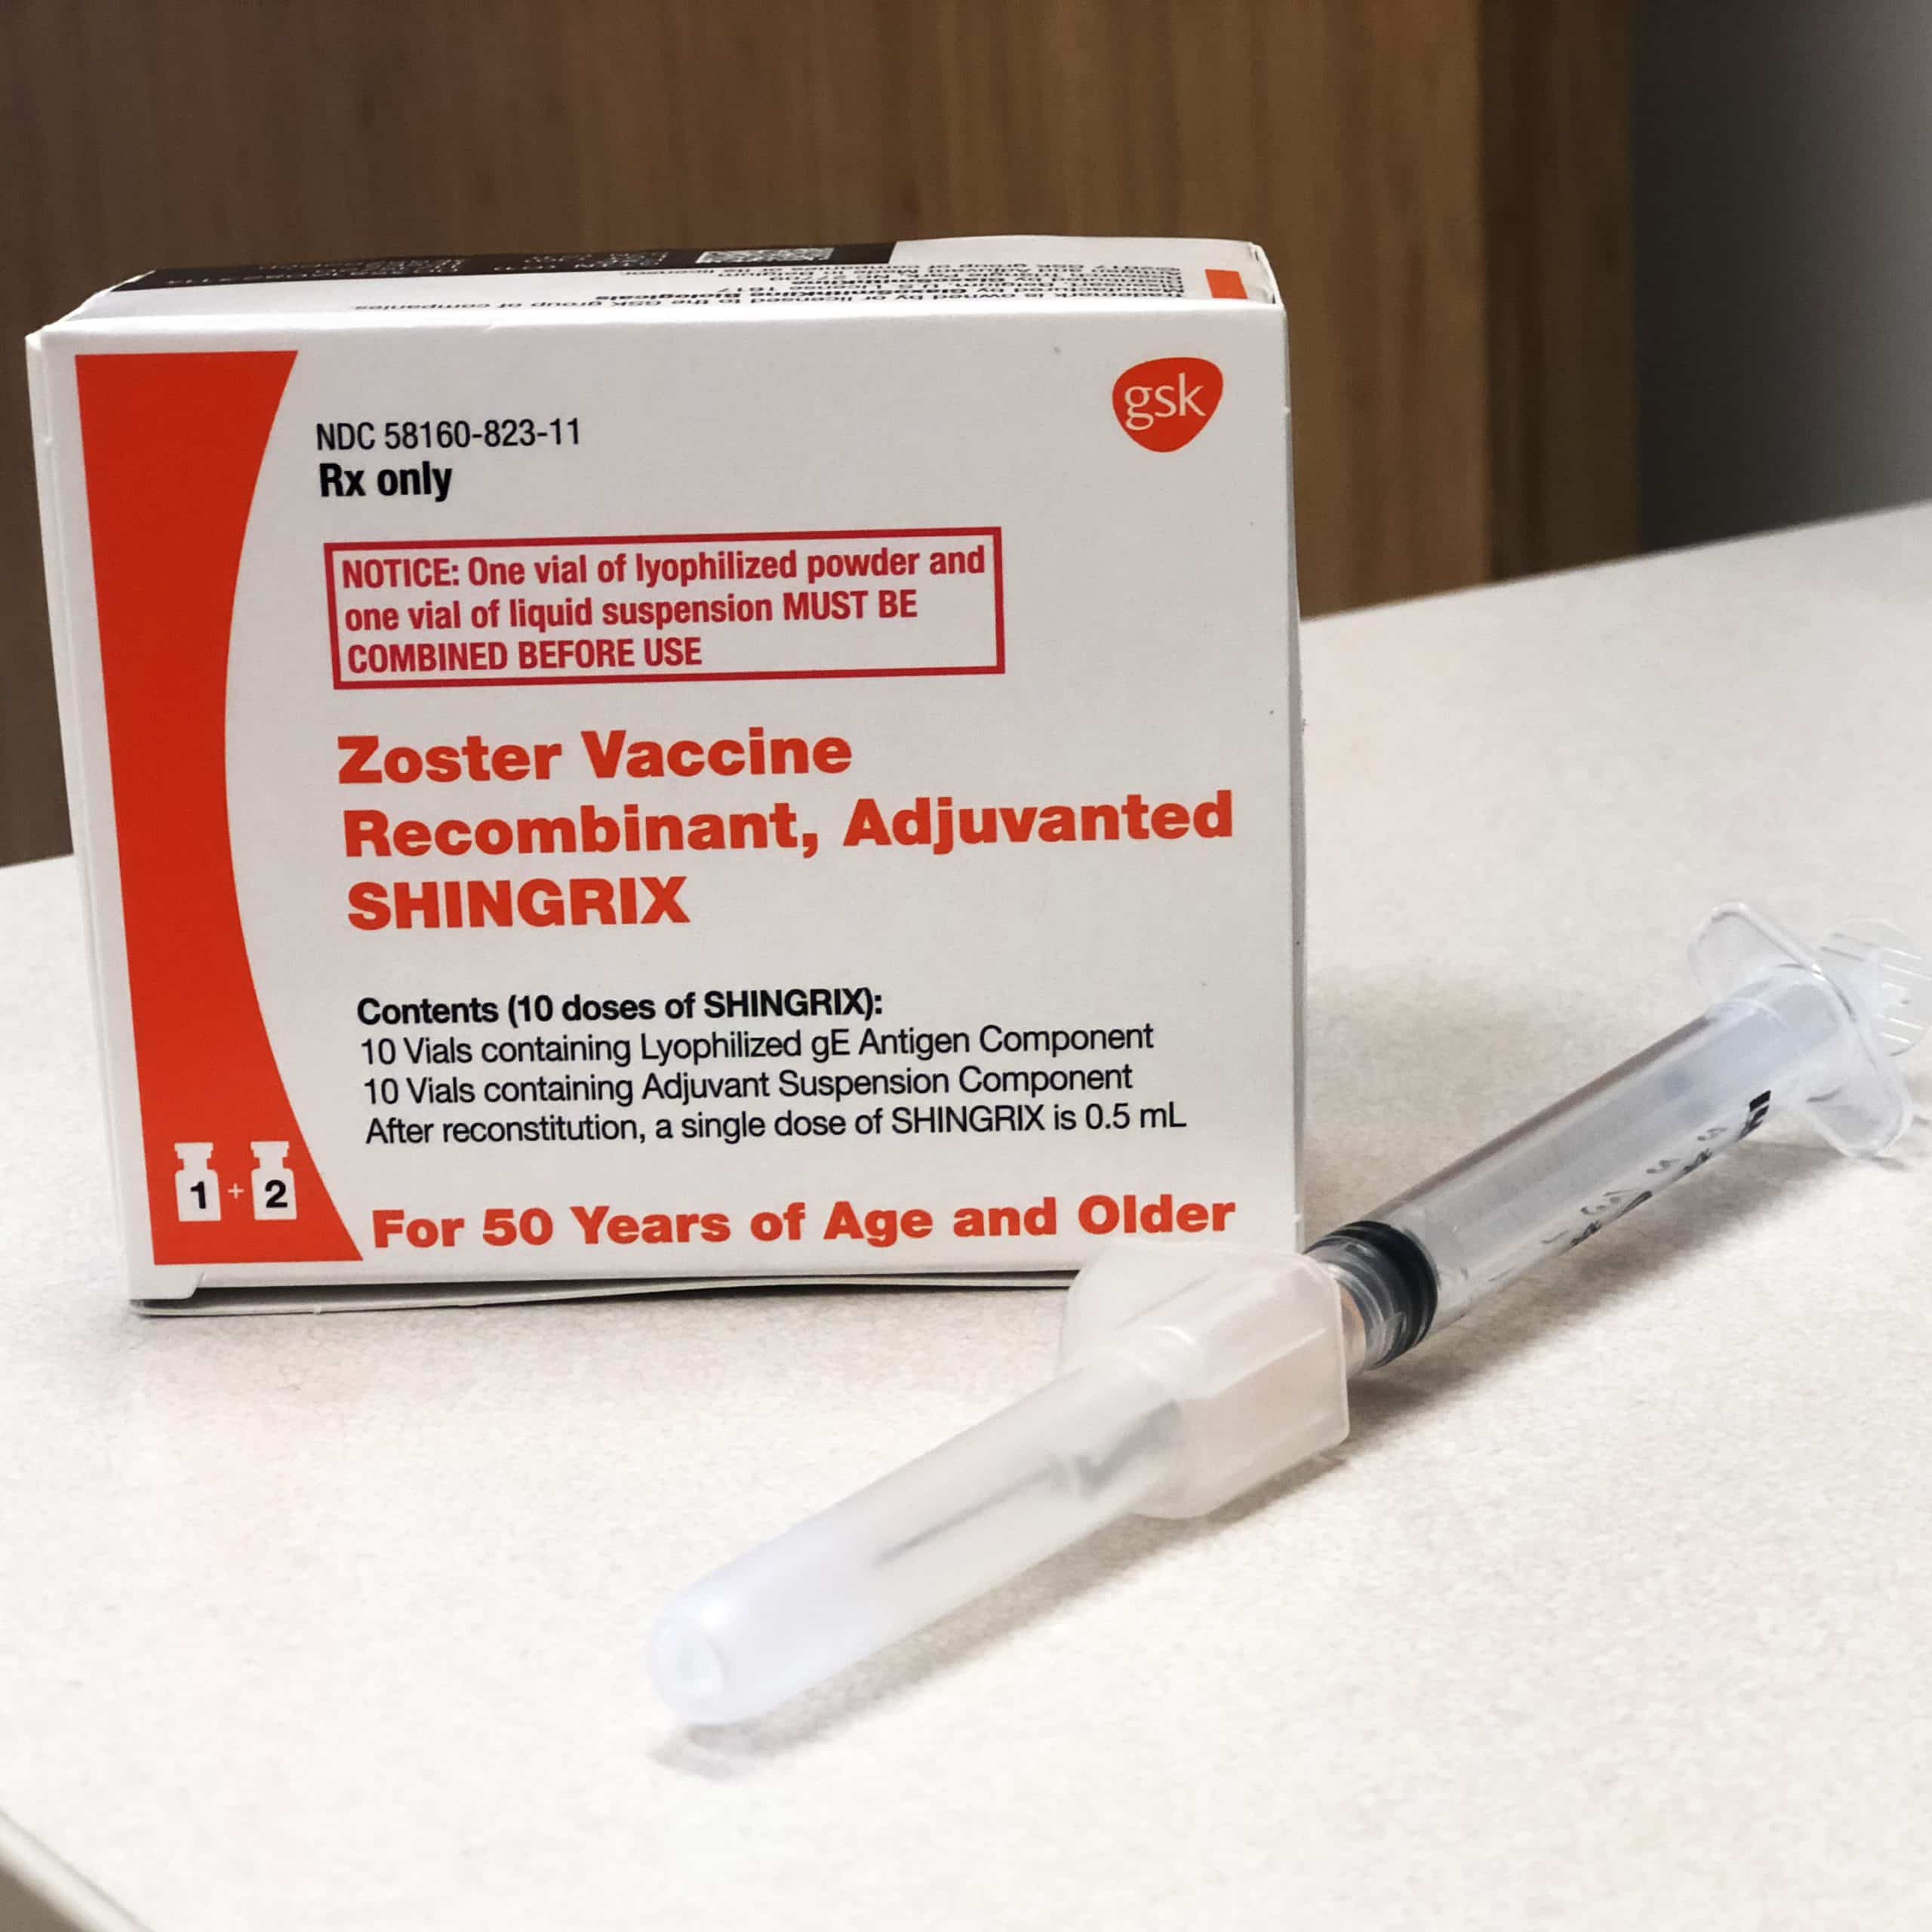 Does express scripts cover shingrix vaccine